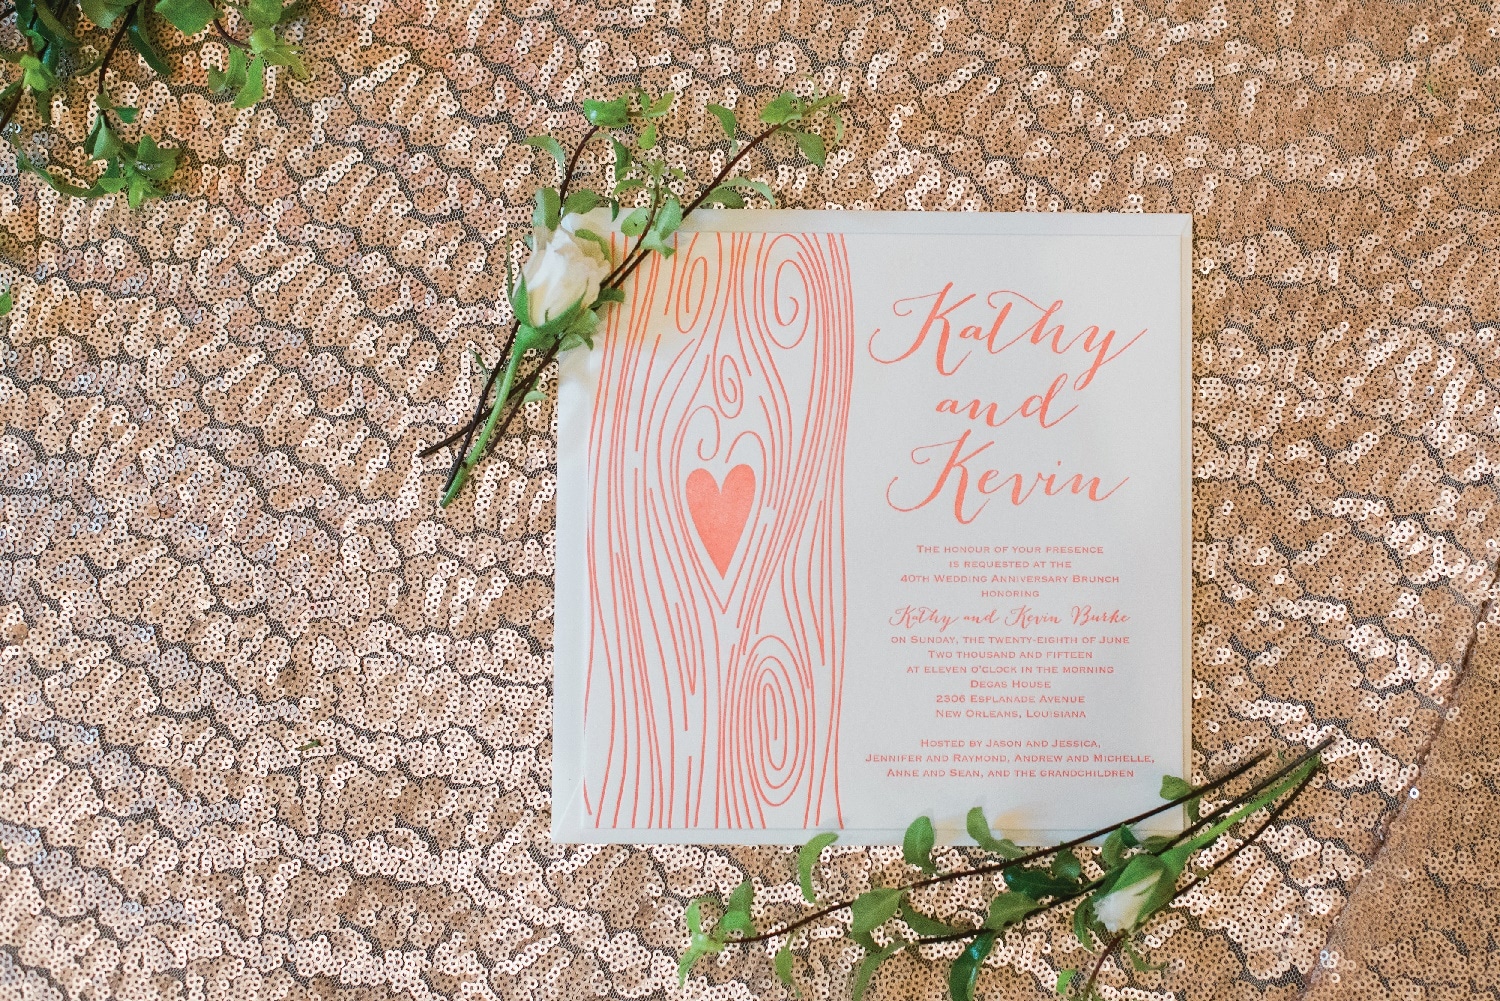 Letterpress style invitation from Abbey Printing. Photo: Red Leaf Weddings